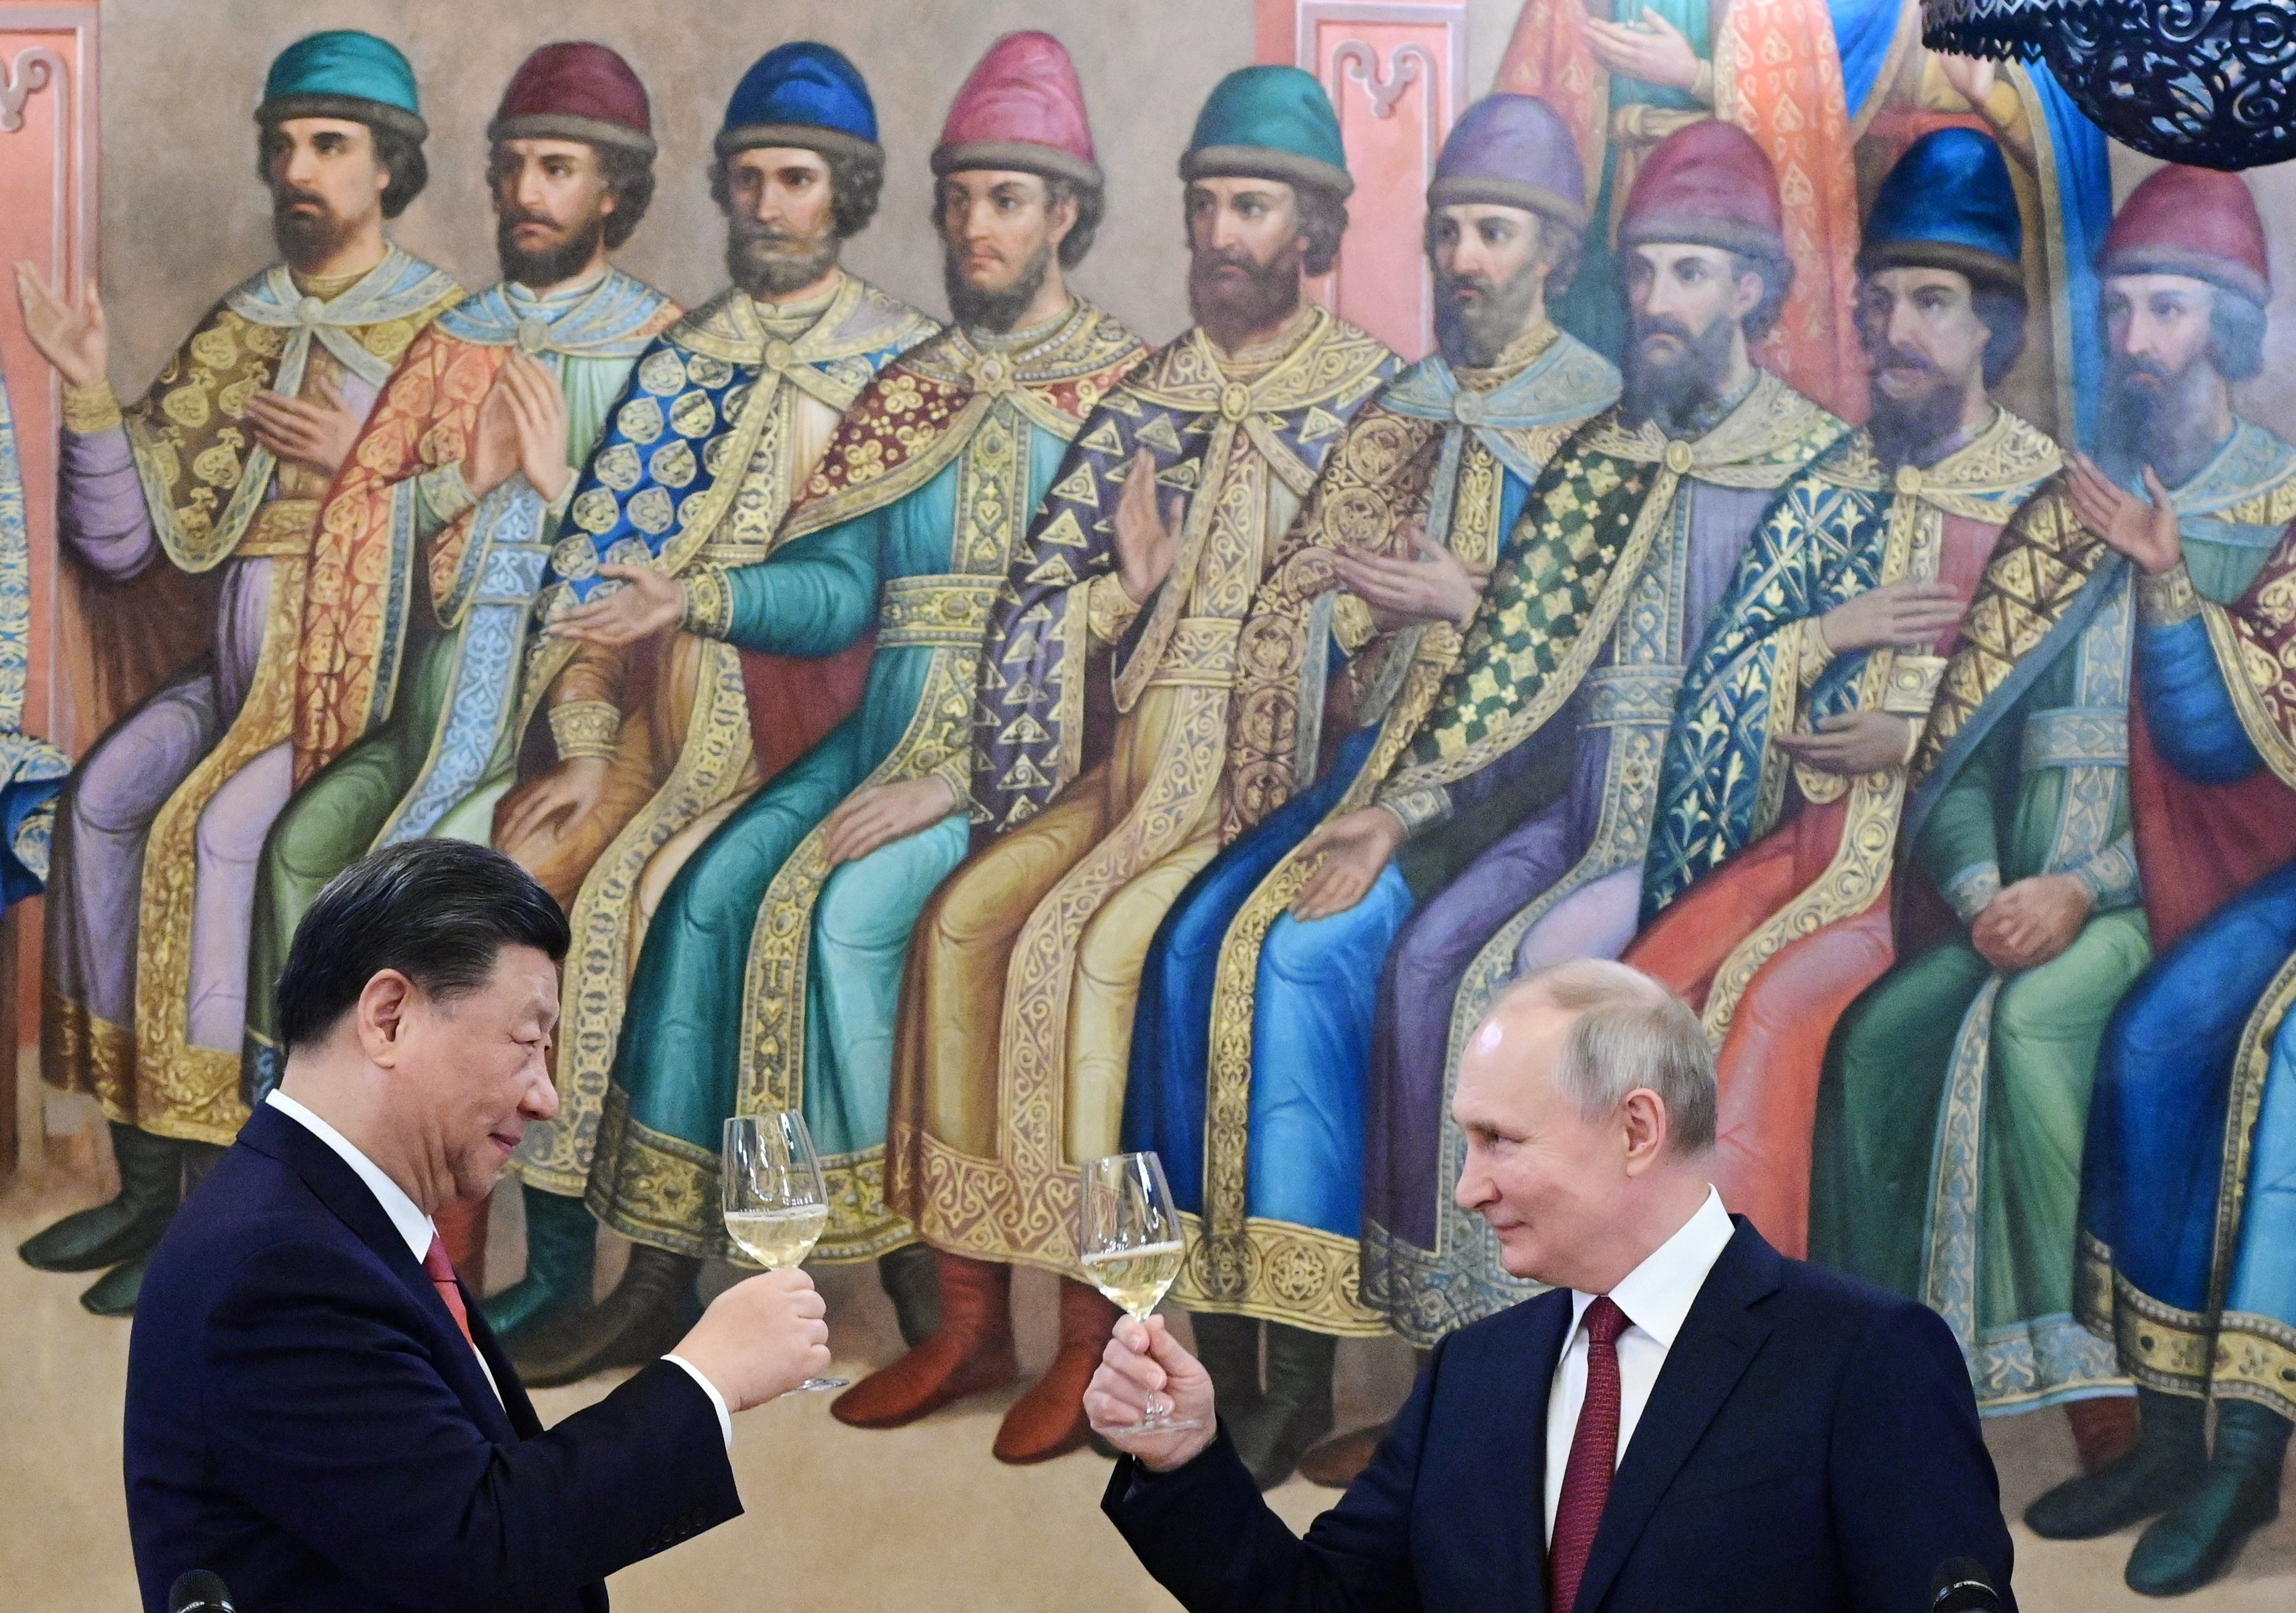 image As Russia tightens ties with China, West offers $16 bln lifeline to Kyiv